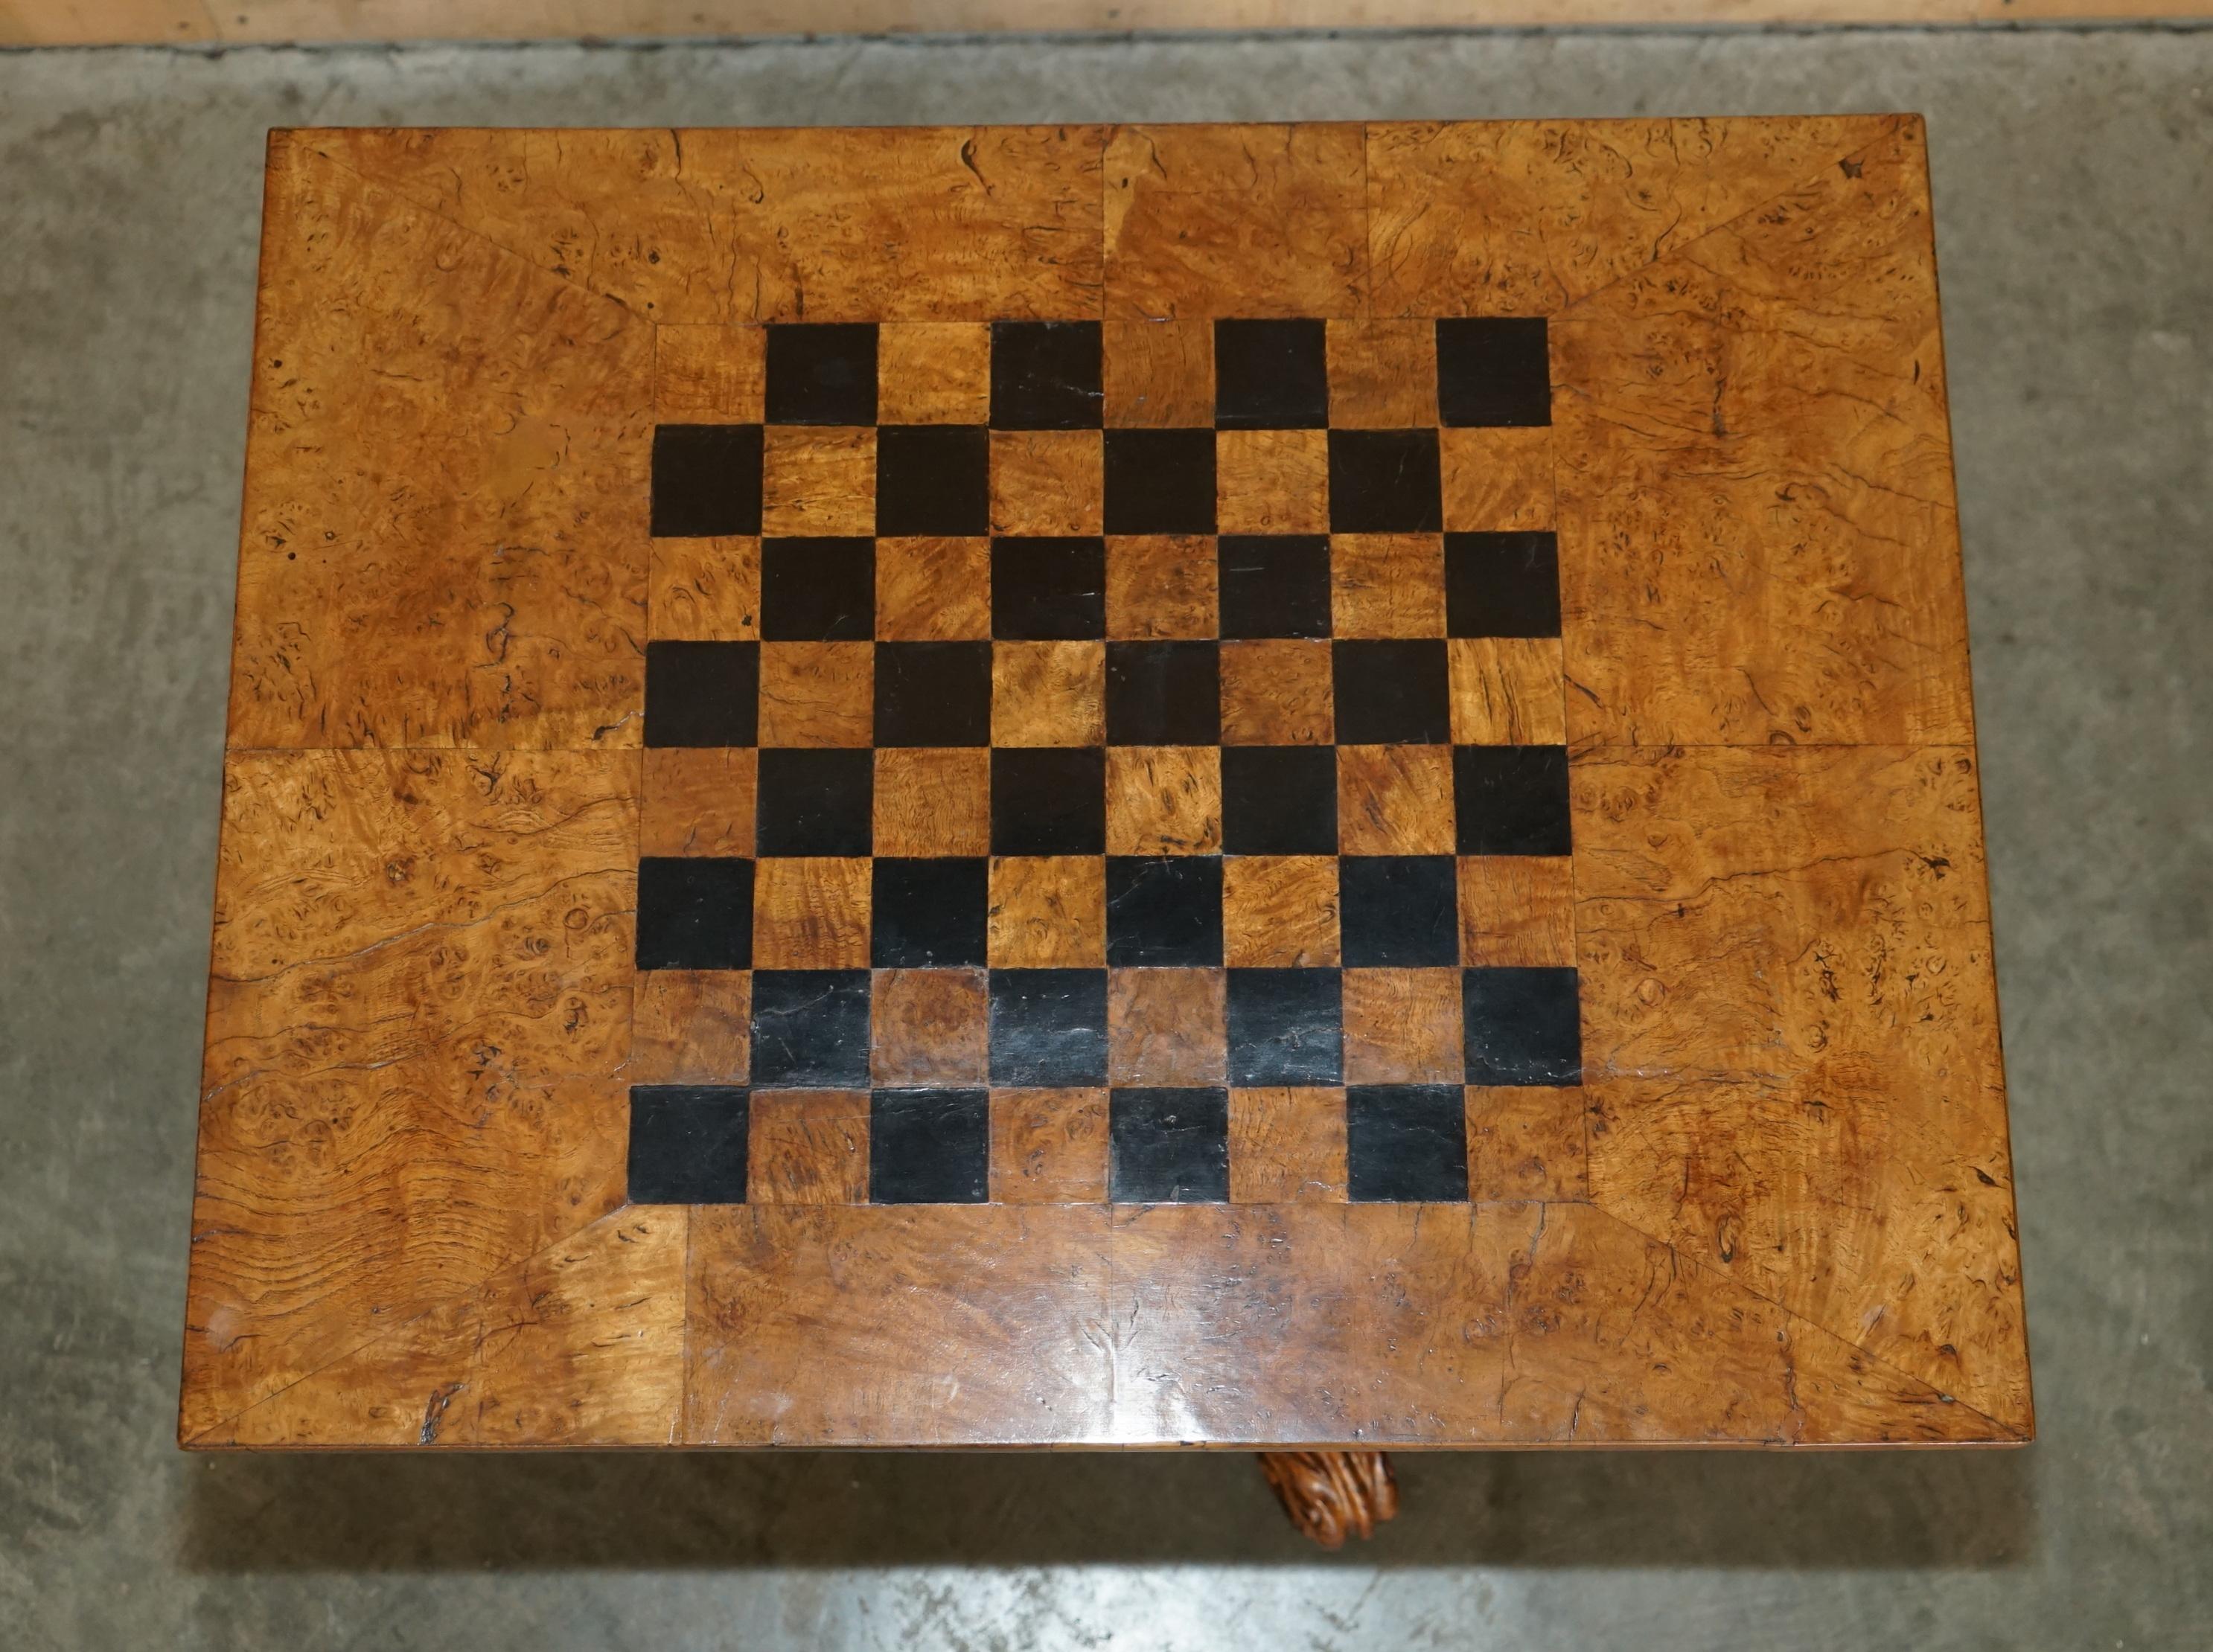 Swiss CIRCA 1850 MALBY & CO MAP OF SWiTZERLAND BY BAUERKELLER BURR WALNUT CHESS TABLE For Sale